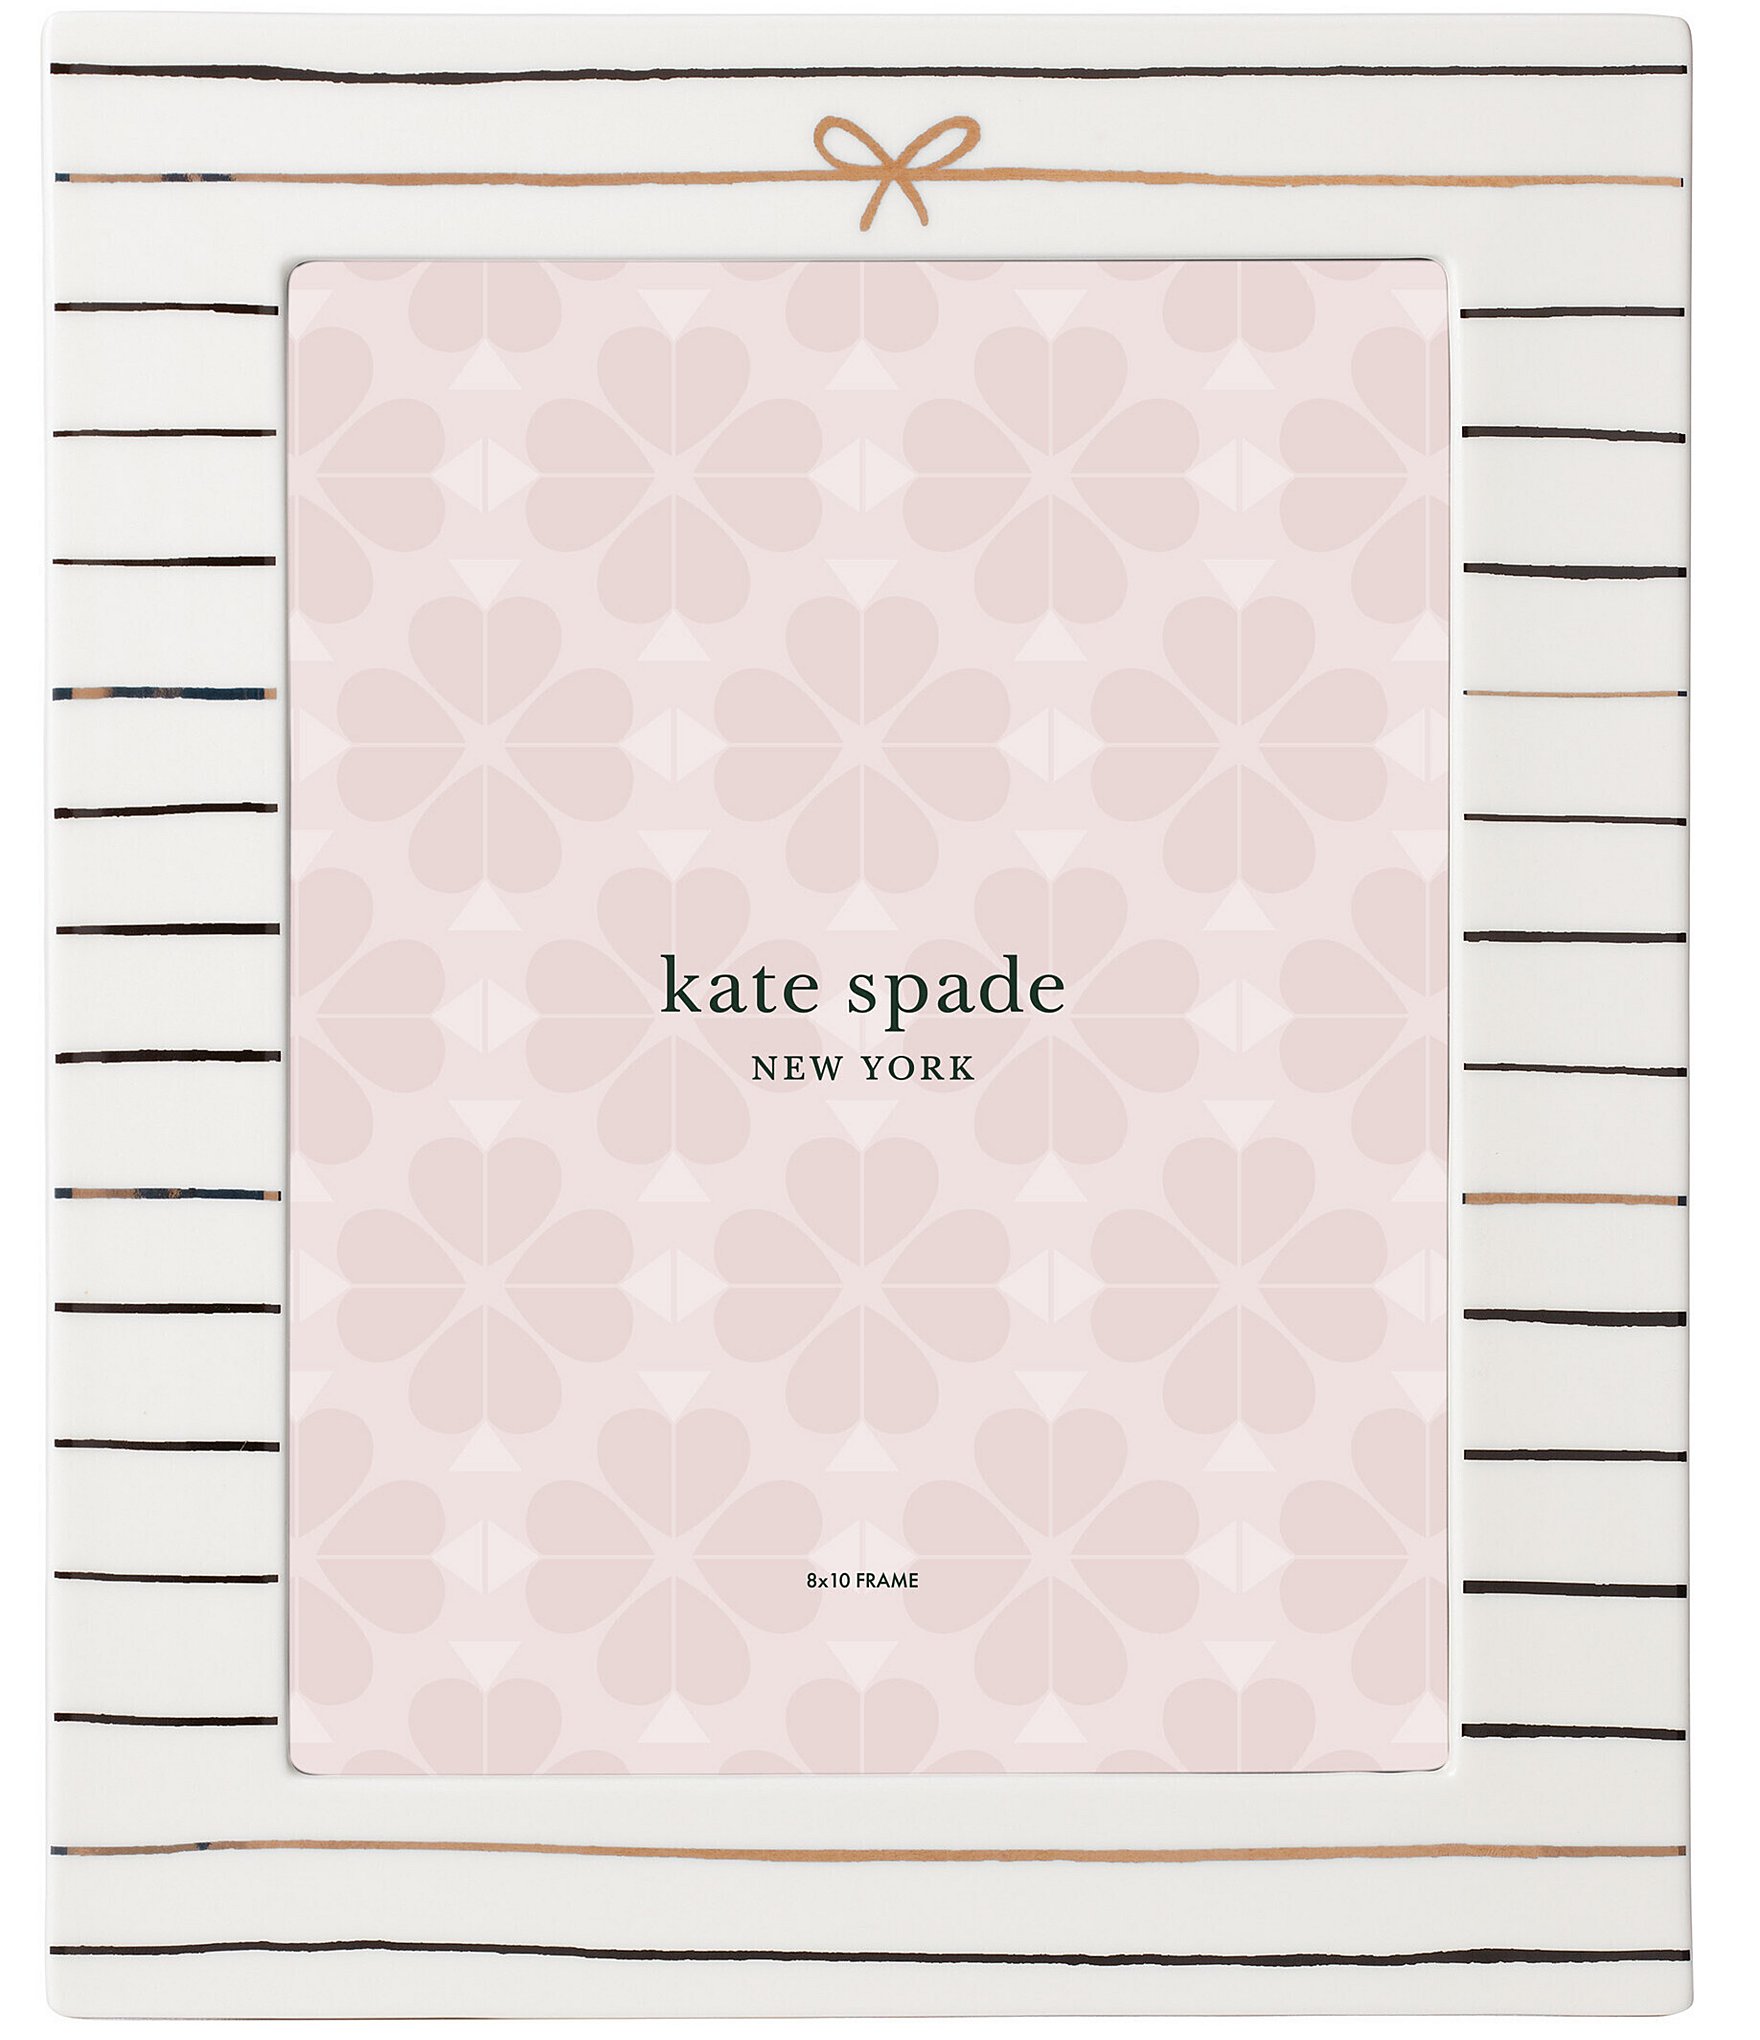 kate spade new york Charmed Life Silver and Gold Stripes 8